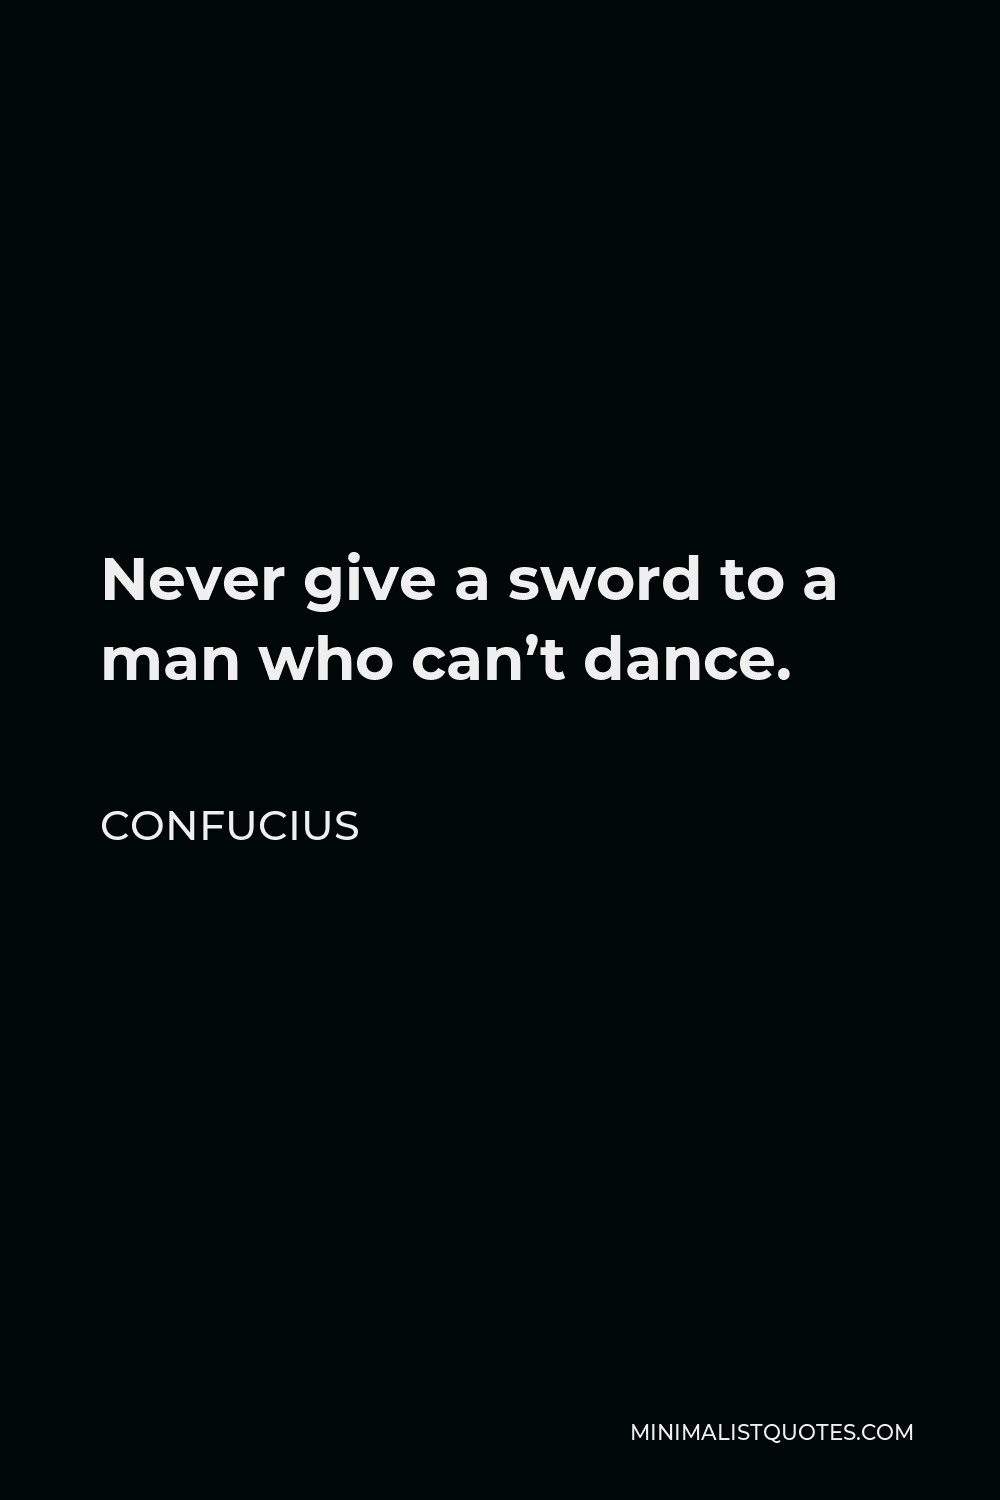 Confucius Quote - Never give a sword to a man who can’t dance.